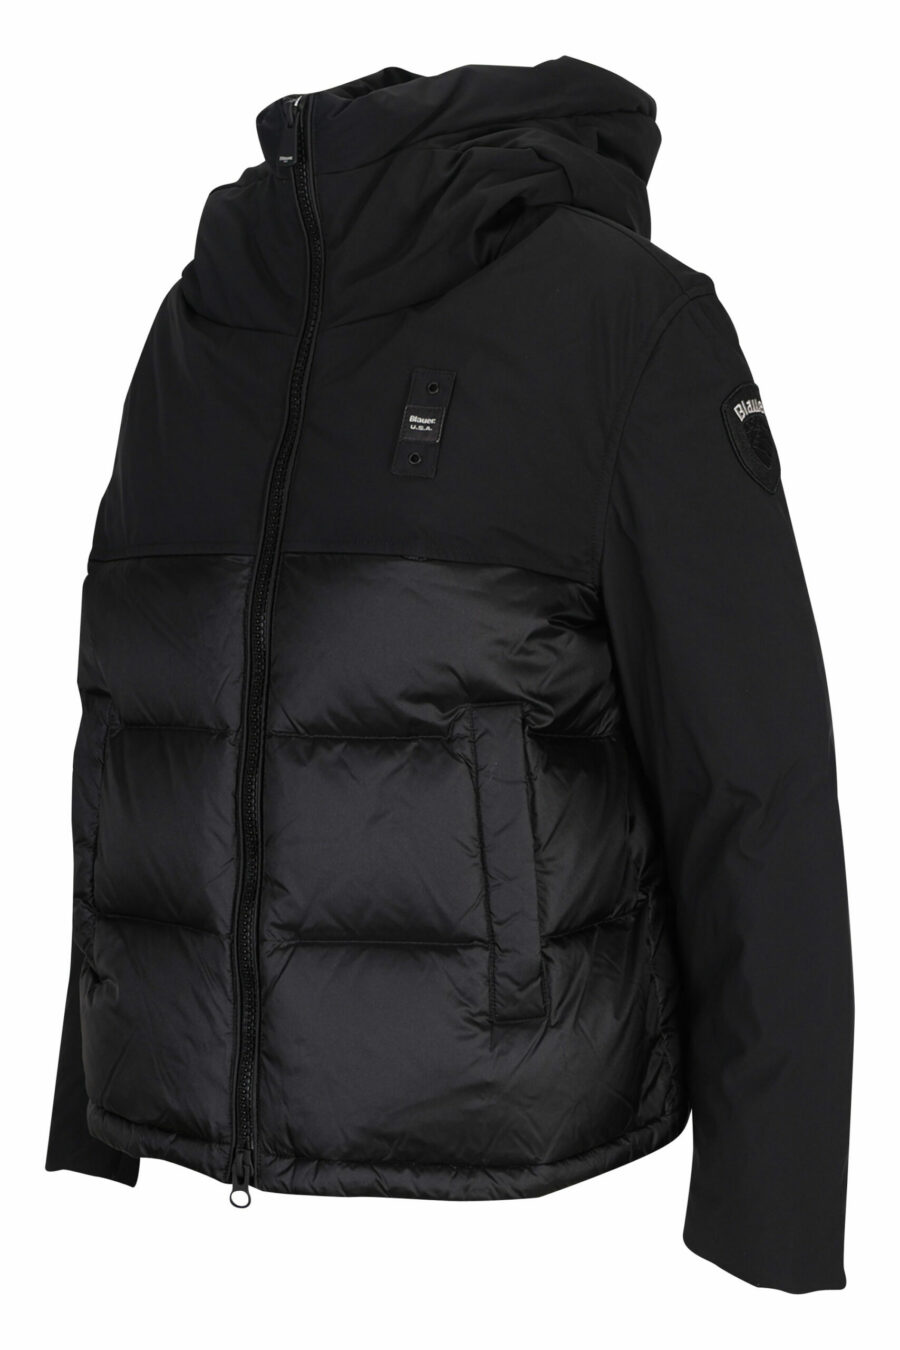 Black hooded jacket with straight lines and logo patch - 8058610647407 1 scaled